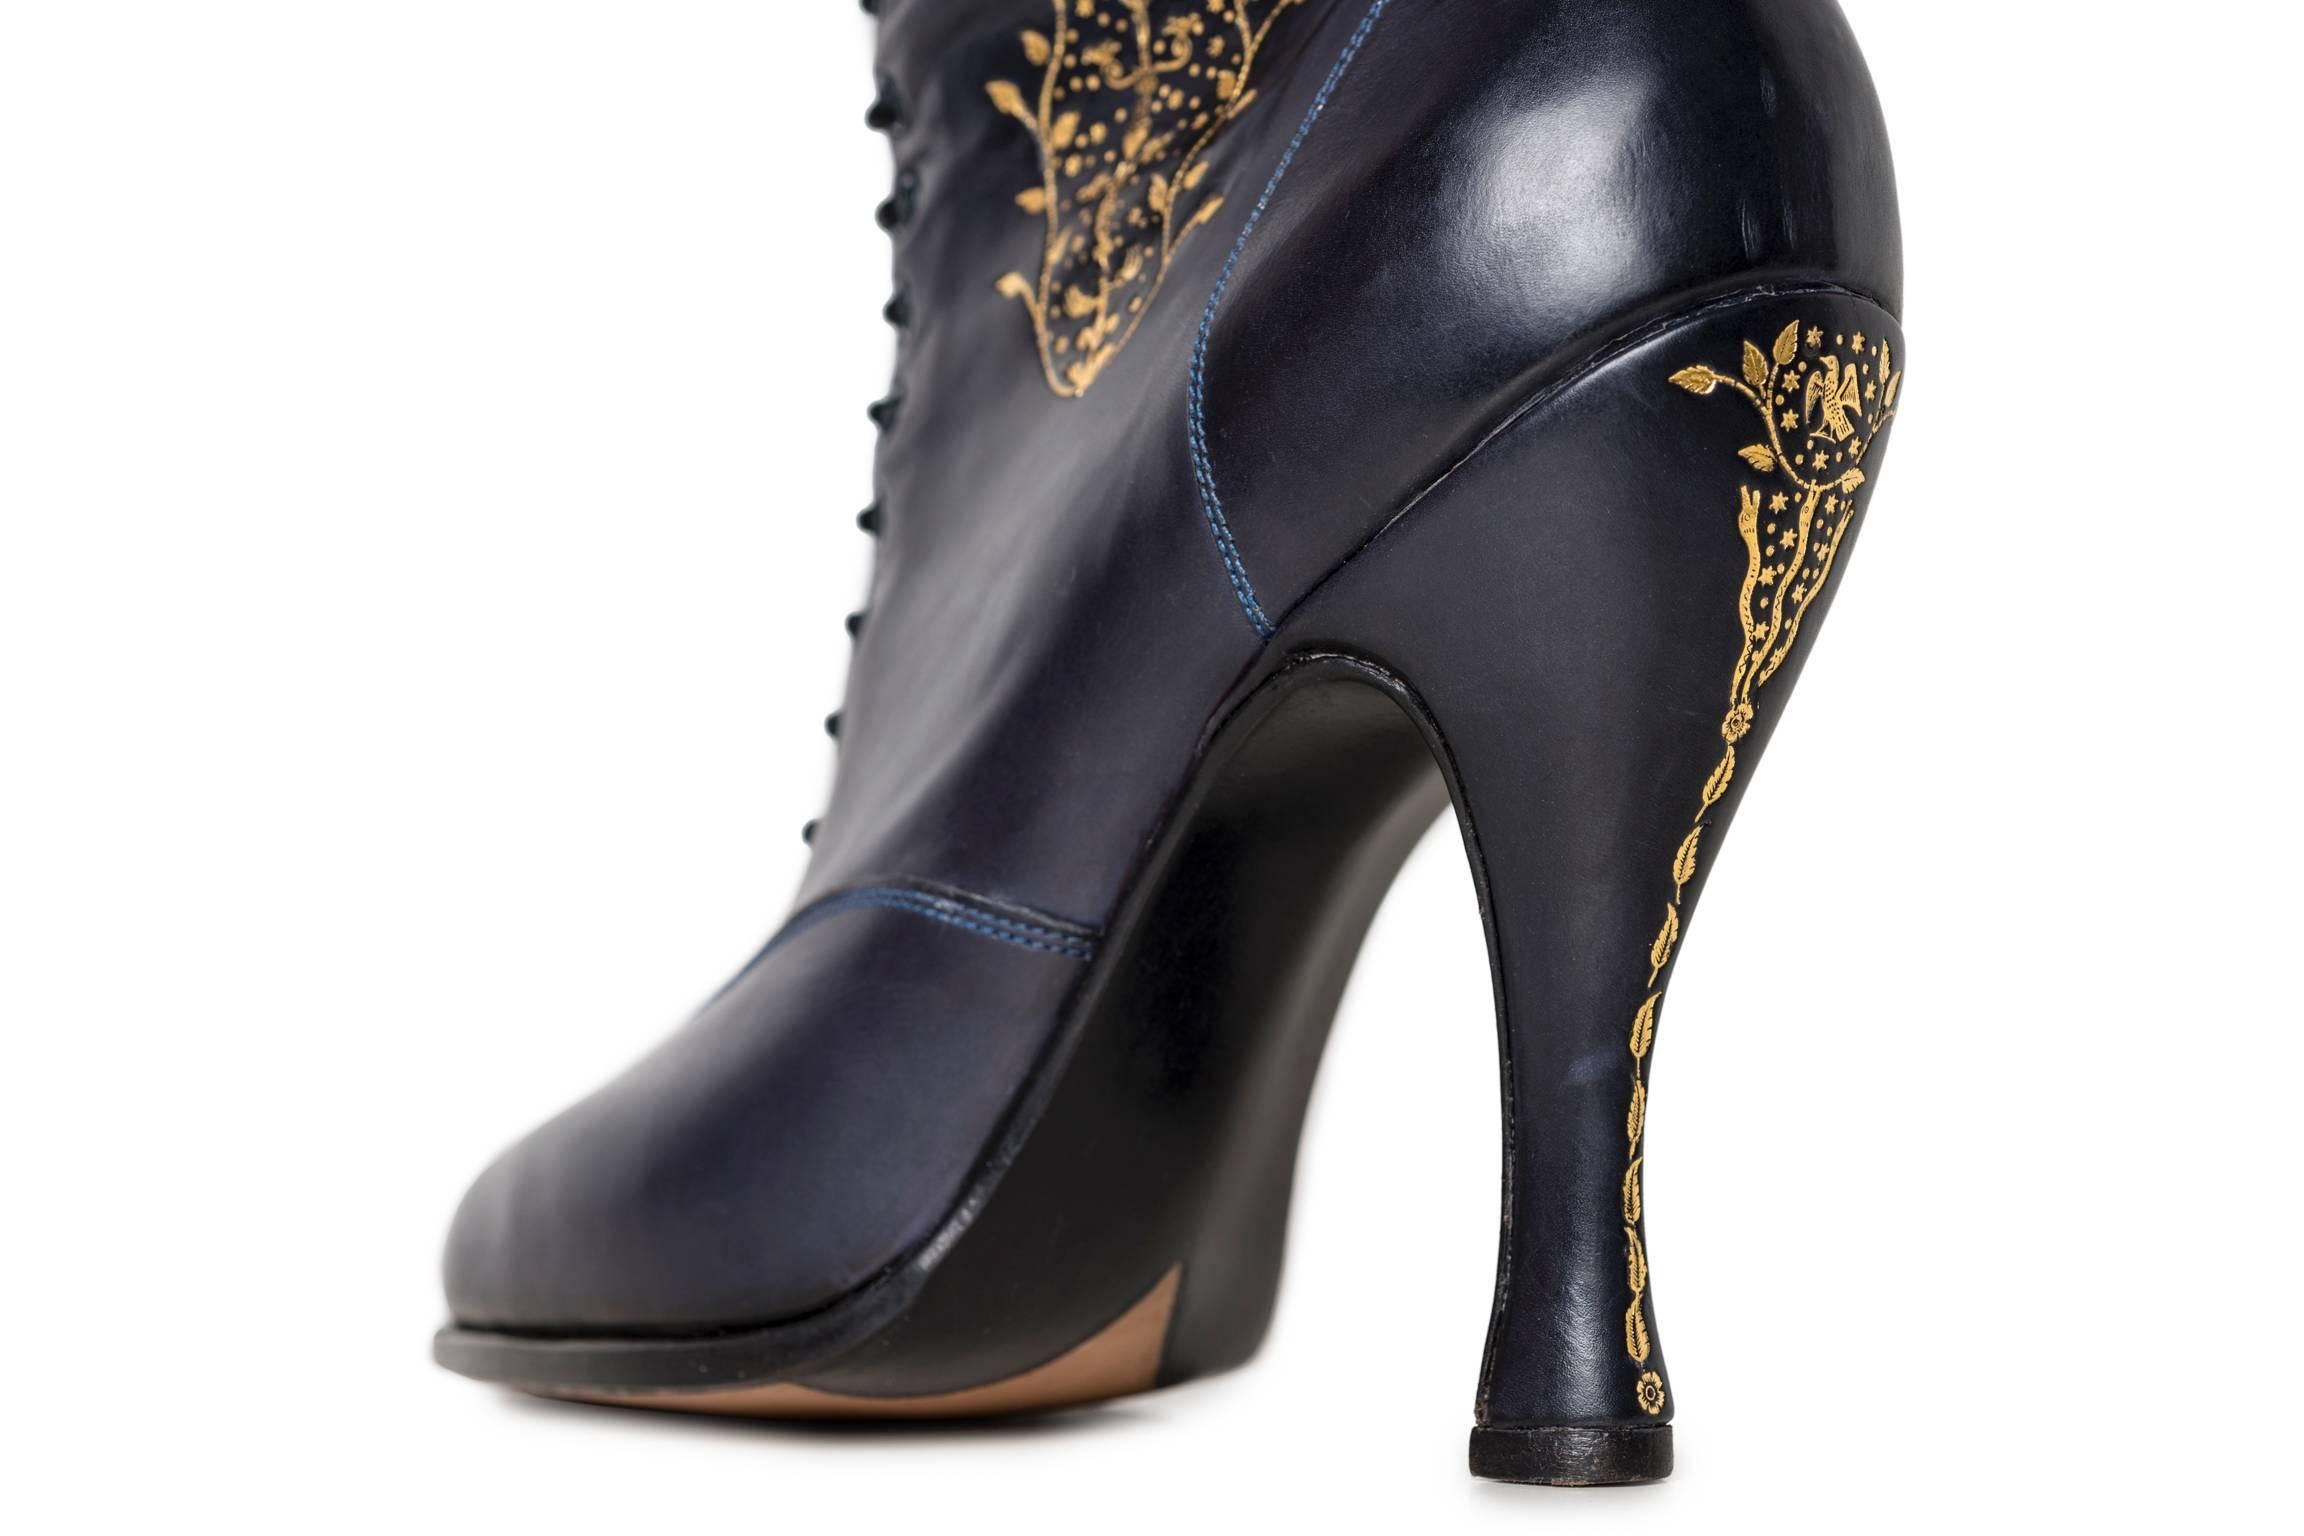 Anastasia are inspired by dreams. Made from navy book calf leather they are hand tooled by Trevor Lloyd with 22t gold in an 18C Irish style, featuring motifs of birds, huntsman, snakes and others. These boots took in excess of 30 hours to hand tool